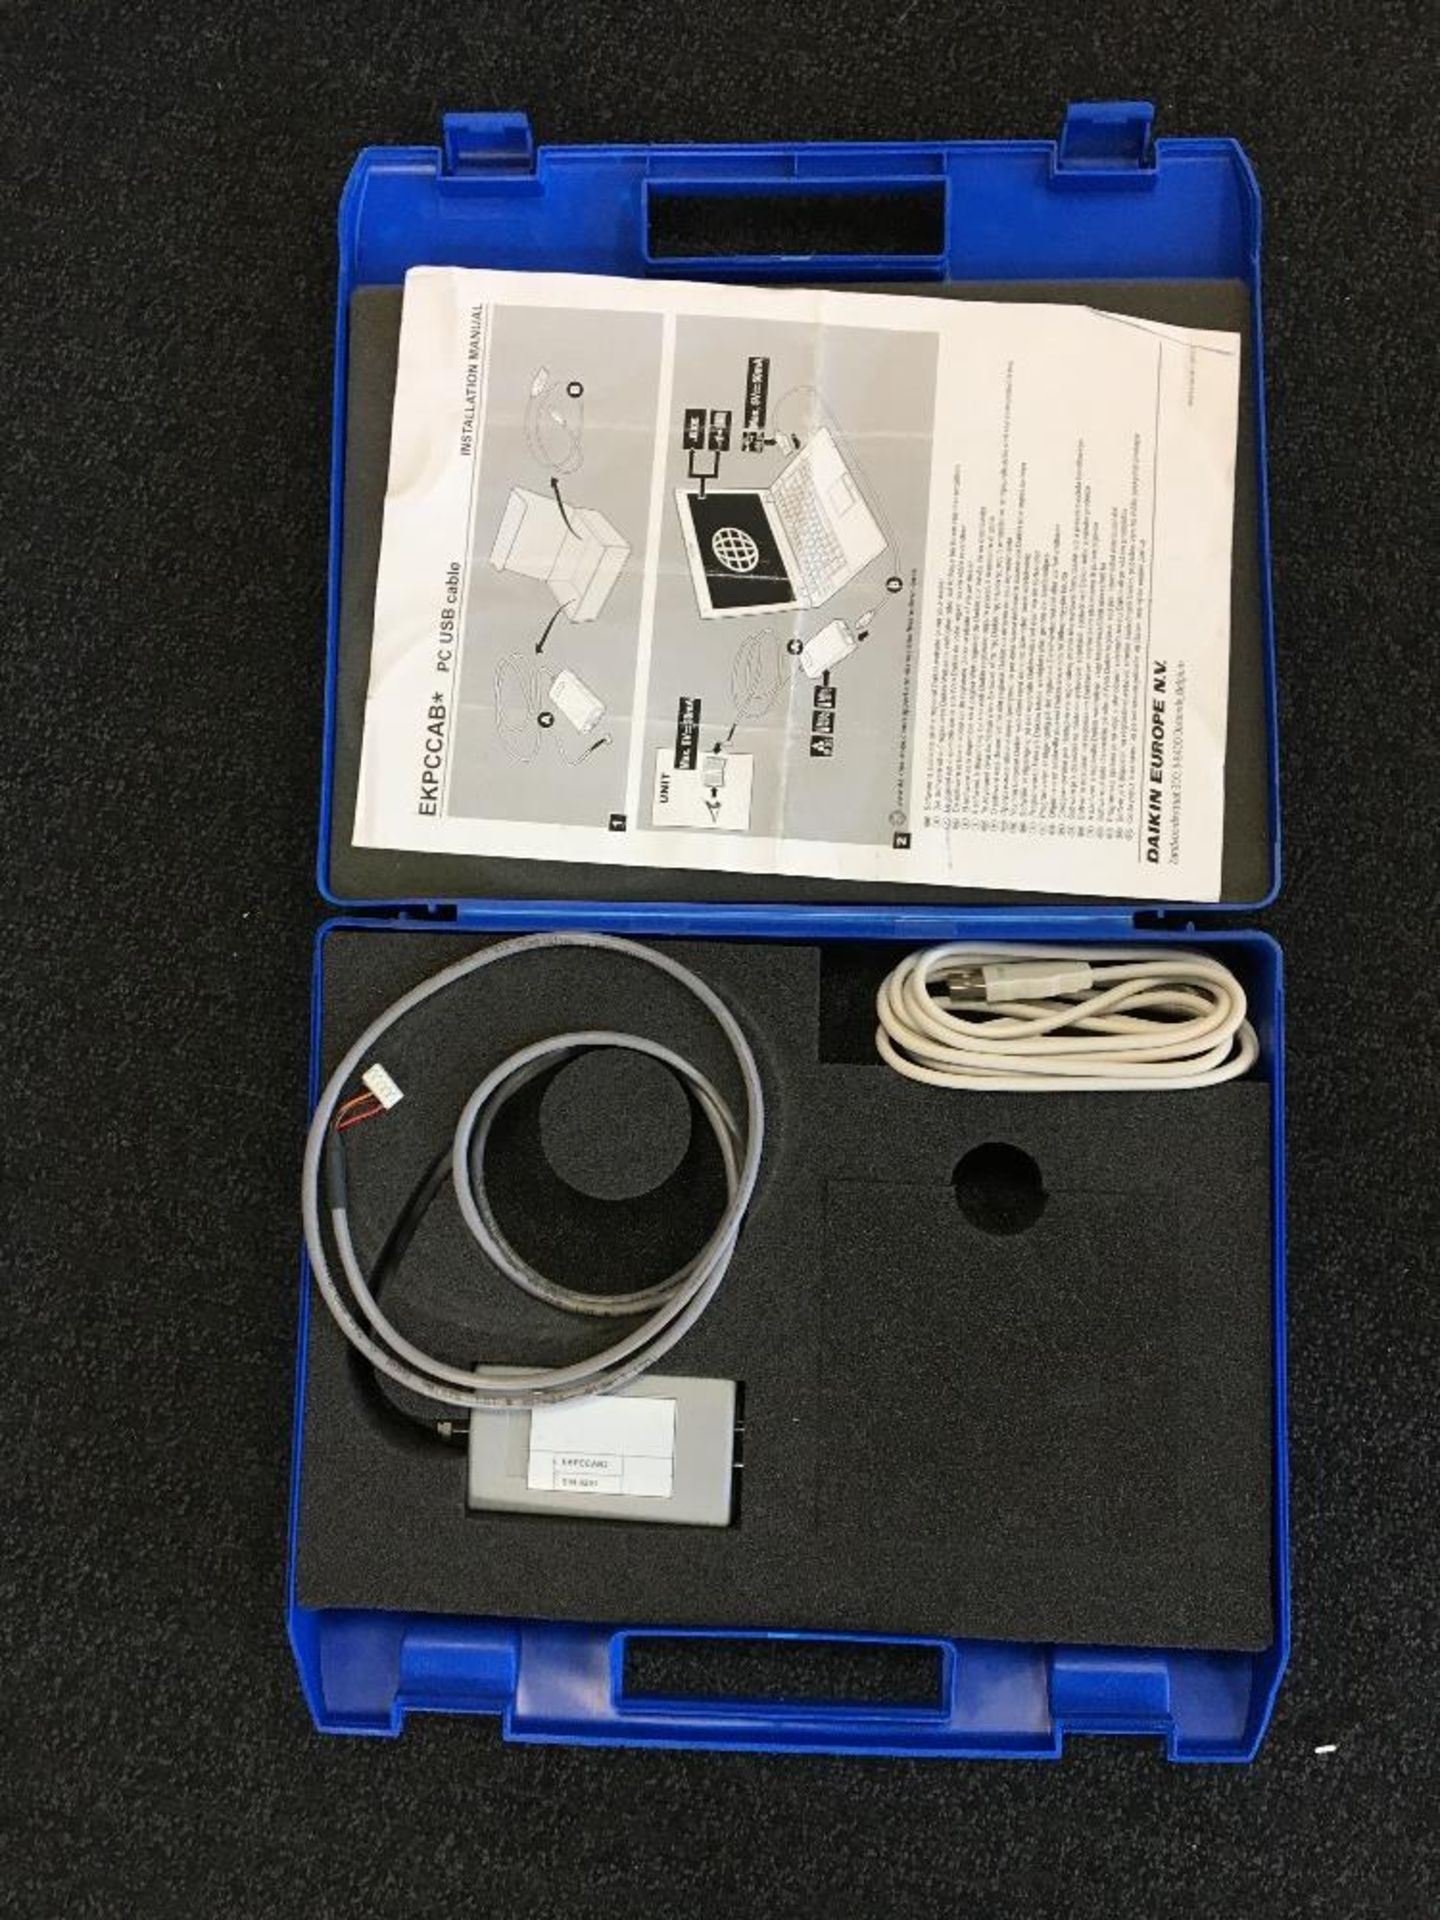 Daikin EKPCCAB Air Con USB Interface Cable with carry case - Image 4 of 4